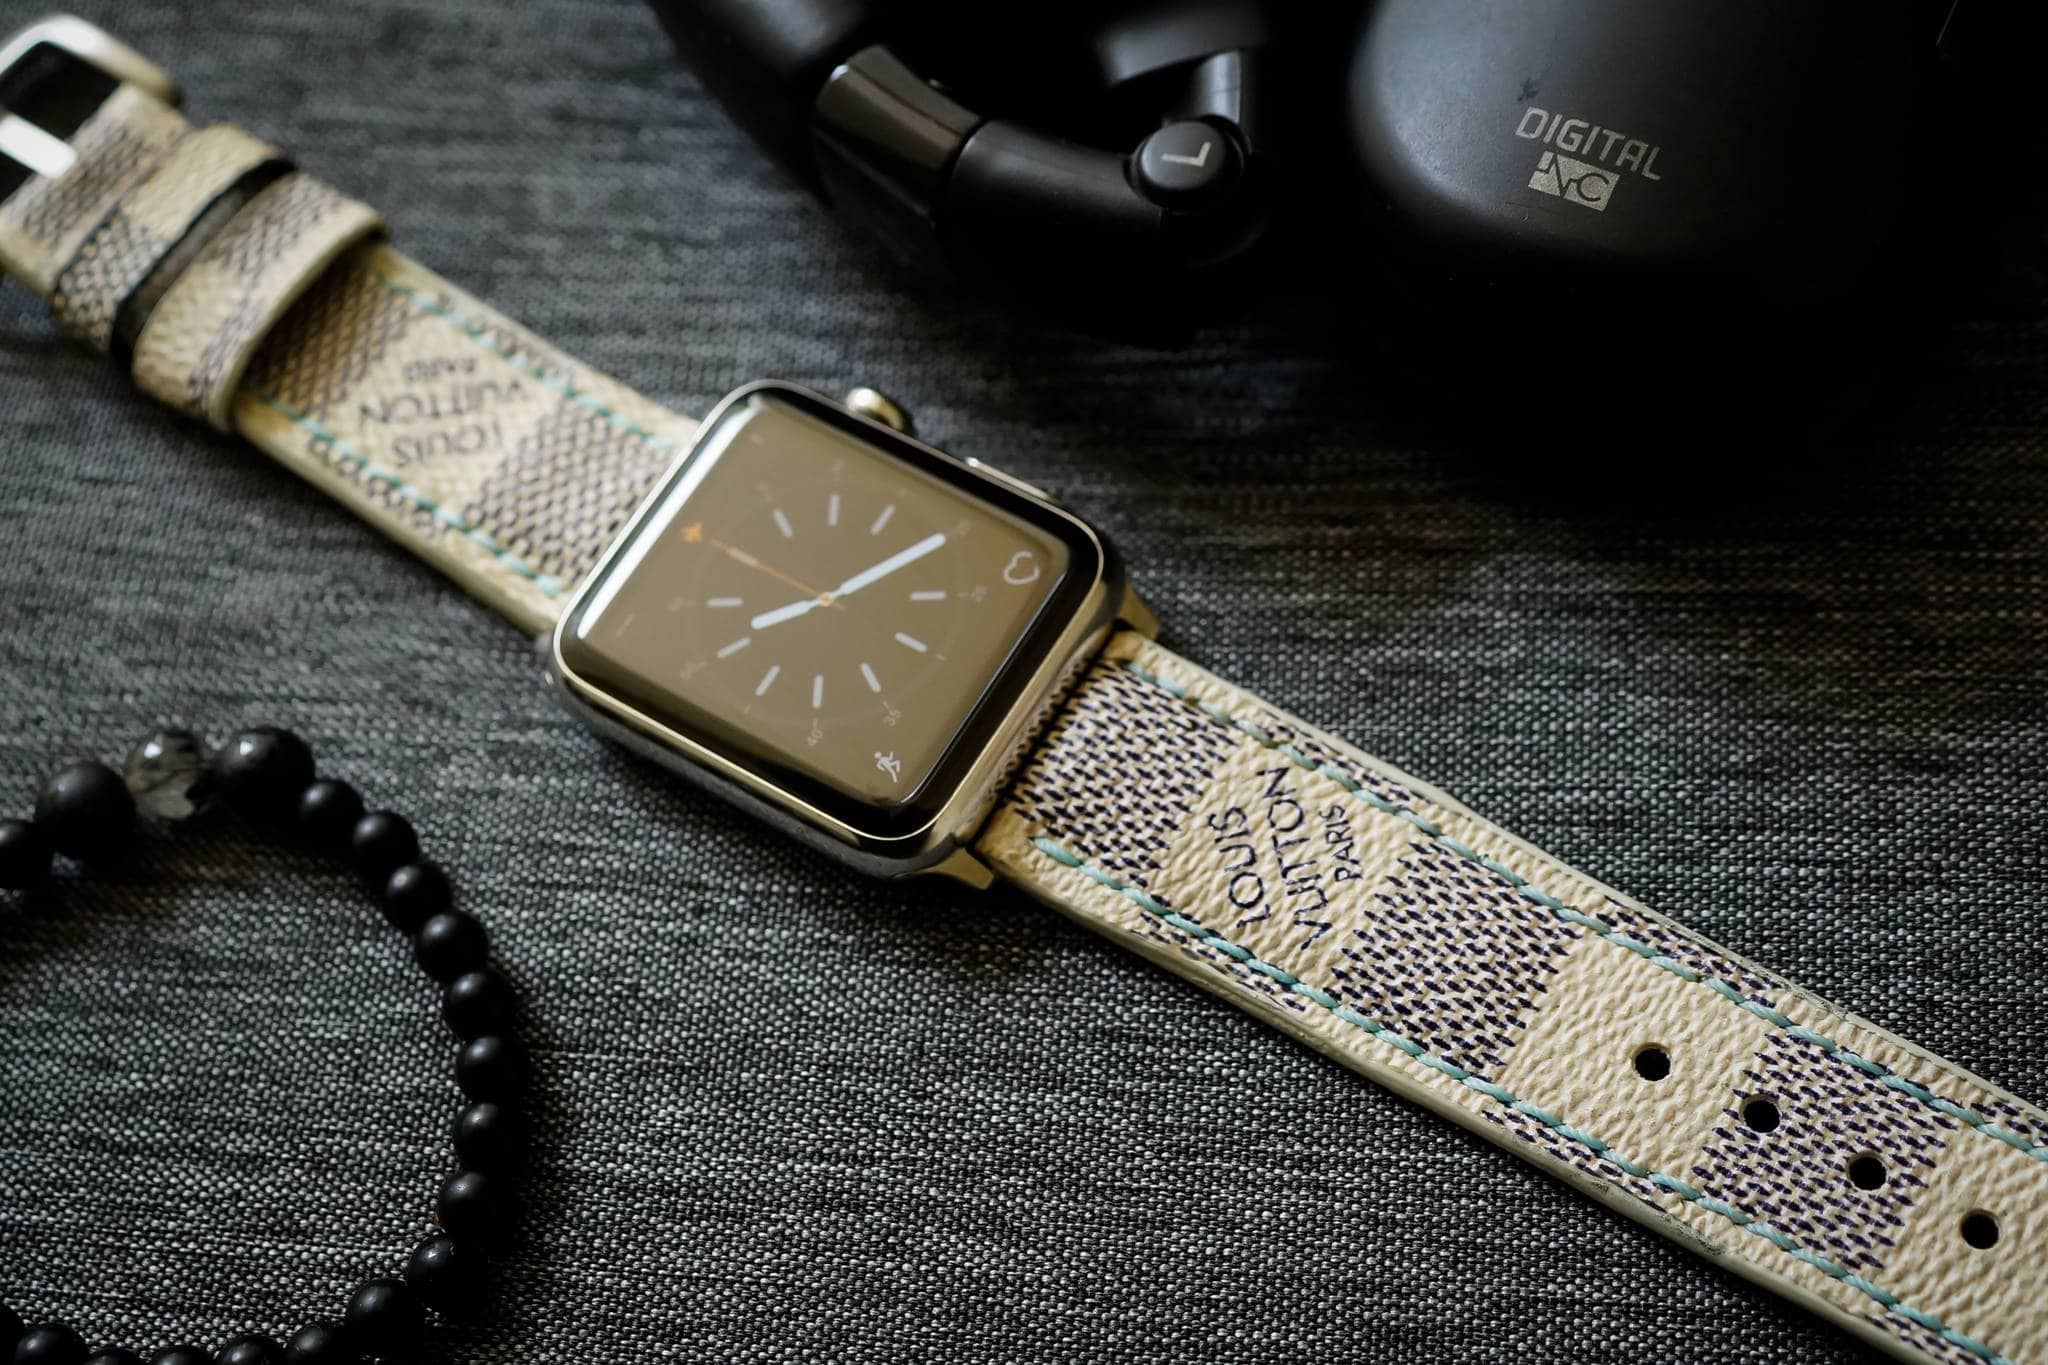 Raindrop Handmade Louis Vuitton for Apple Watch Series  1,2,3,4,5,6,7,8,Ultra,SE Strap Band LV 26 – Limited Edition